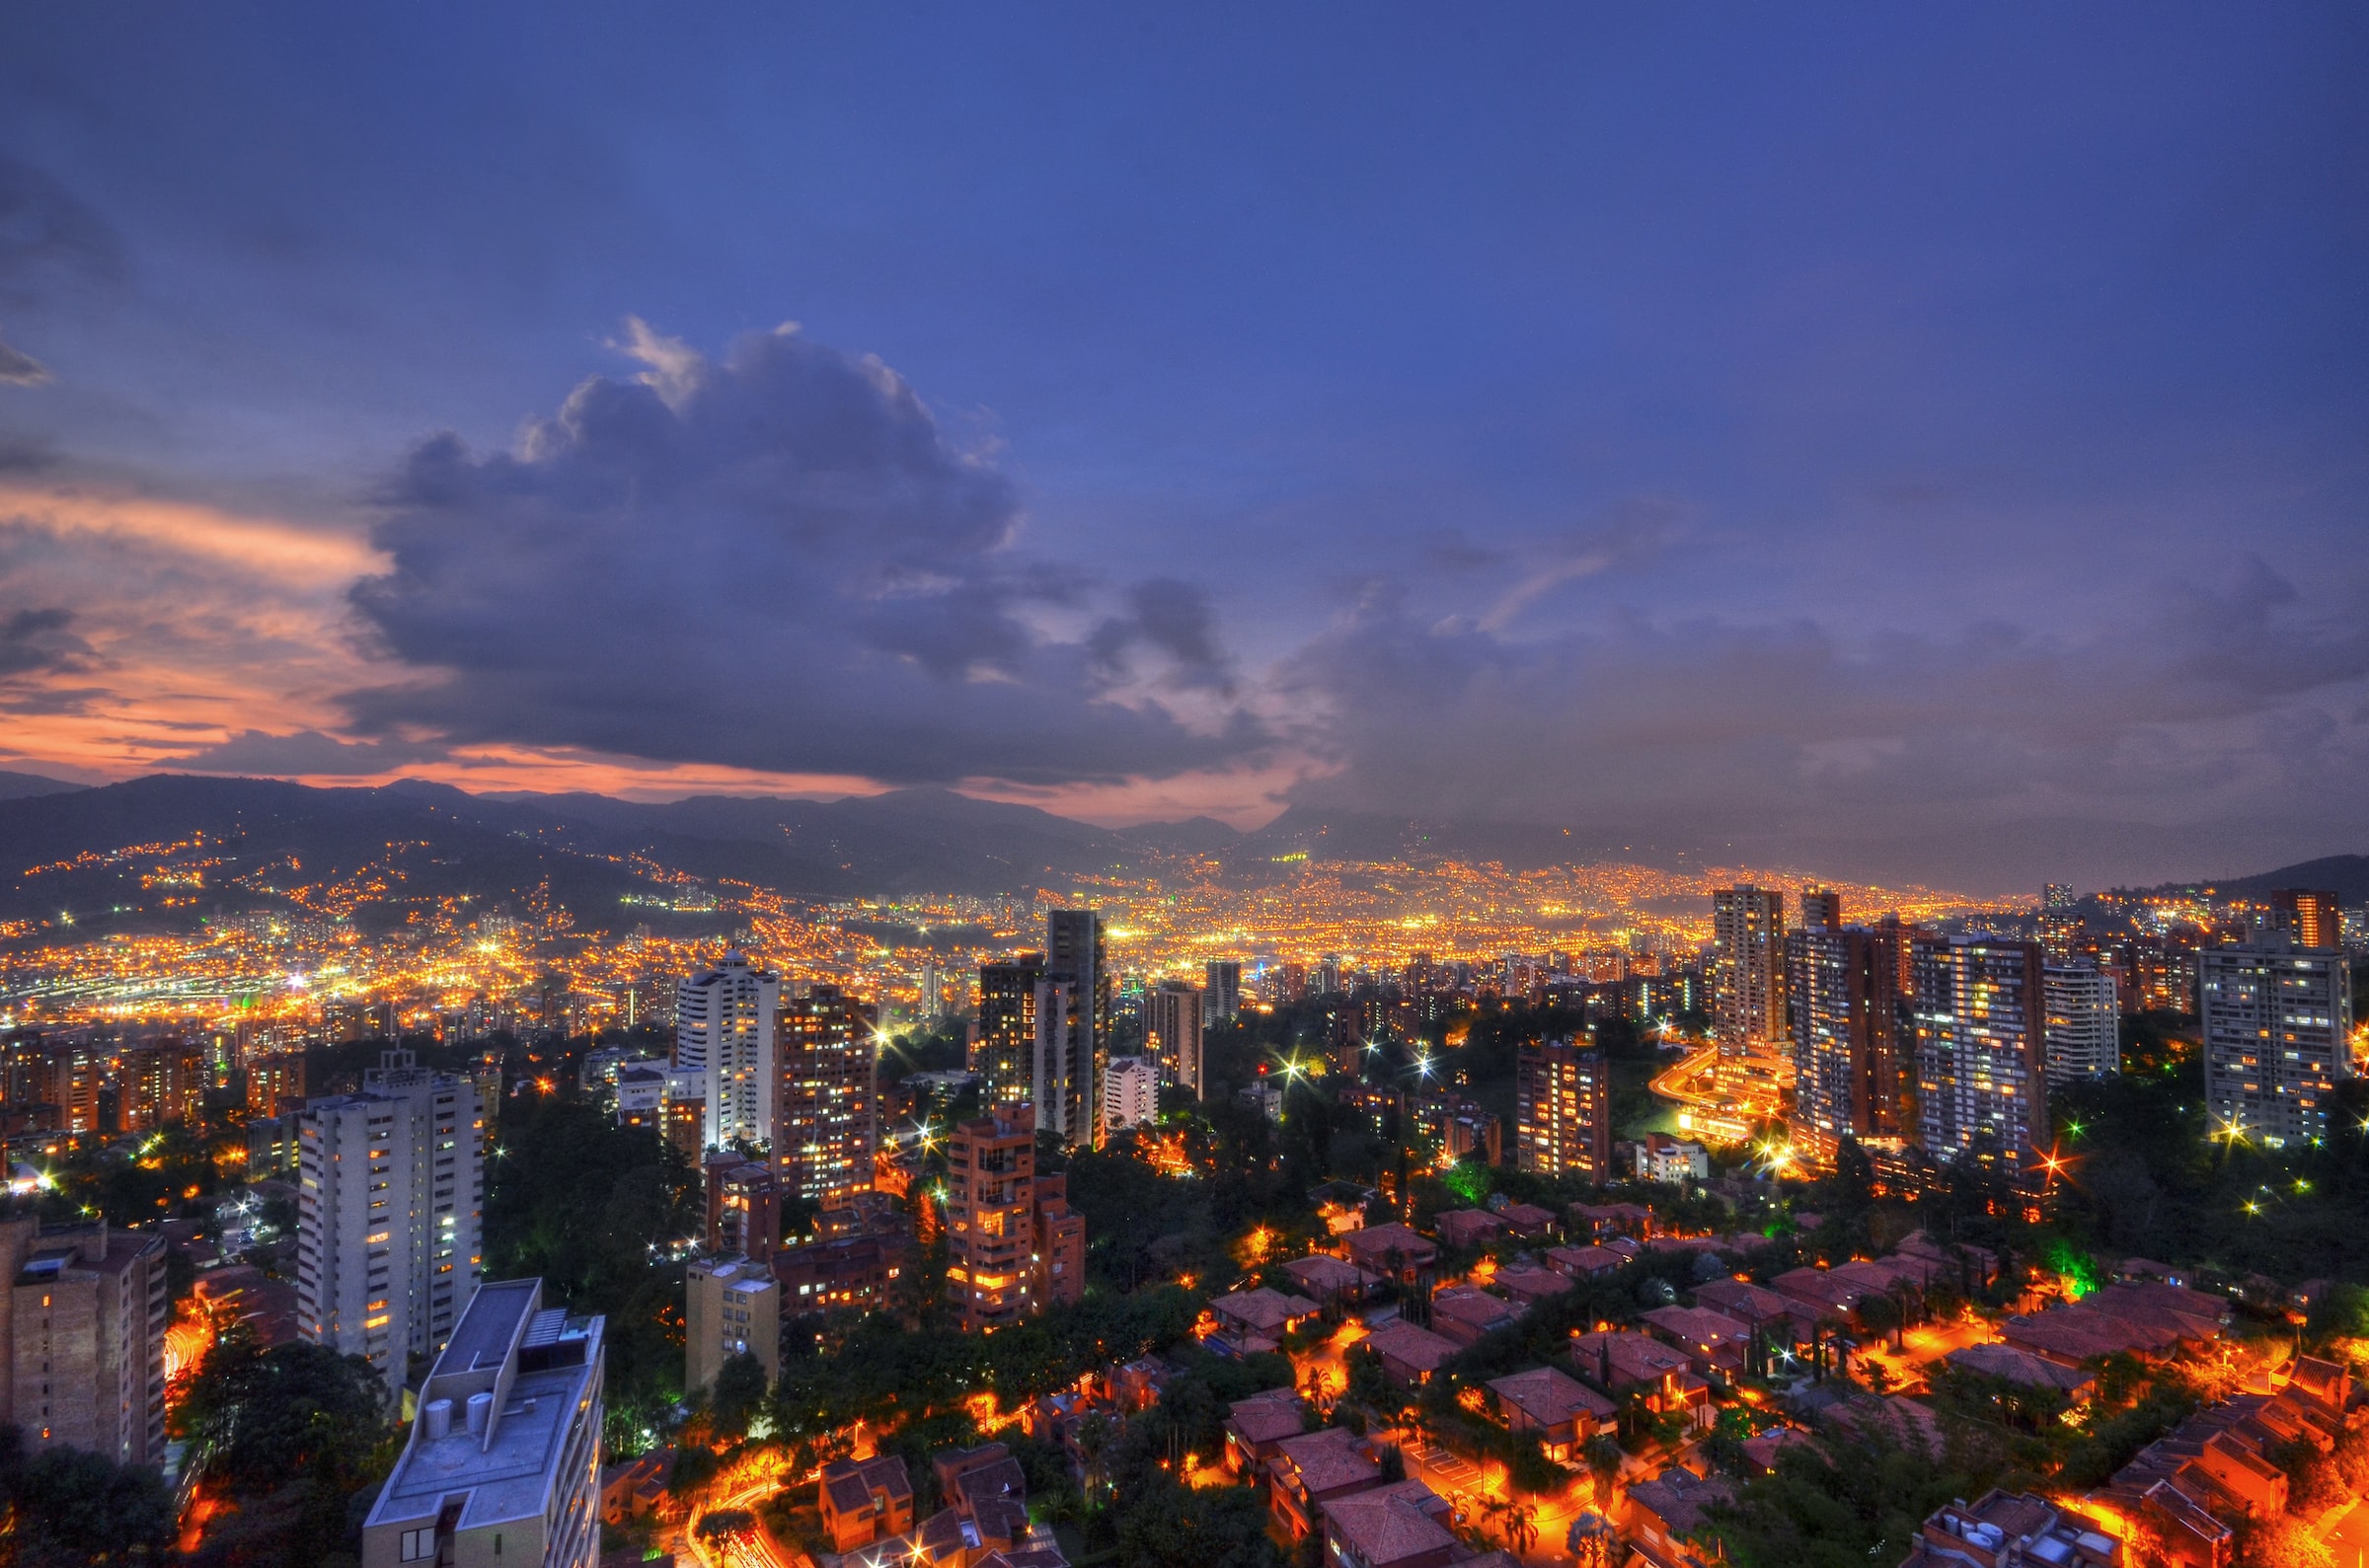 Skyview of the city of medellin